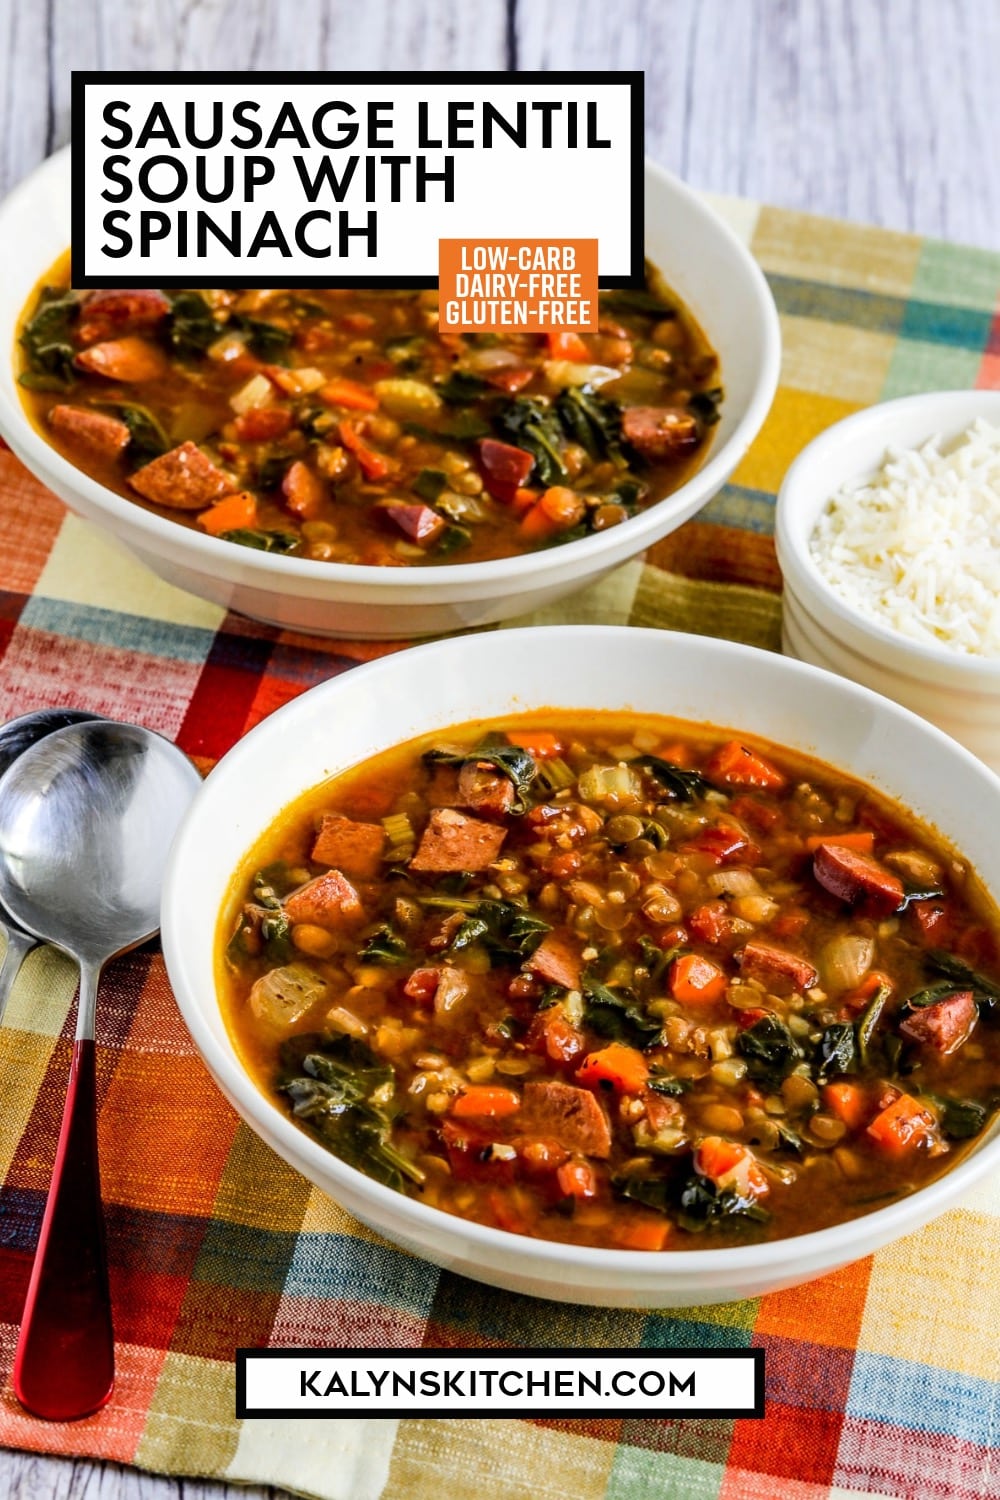 Pinterest image of Sausage Lentil Soup with Spinach